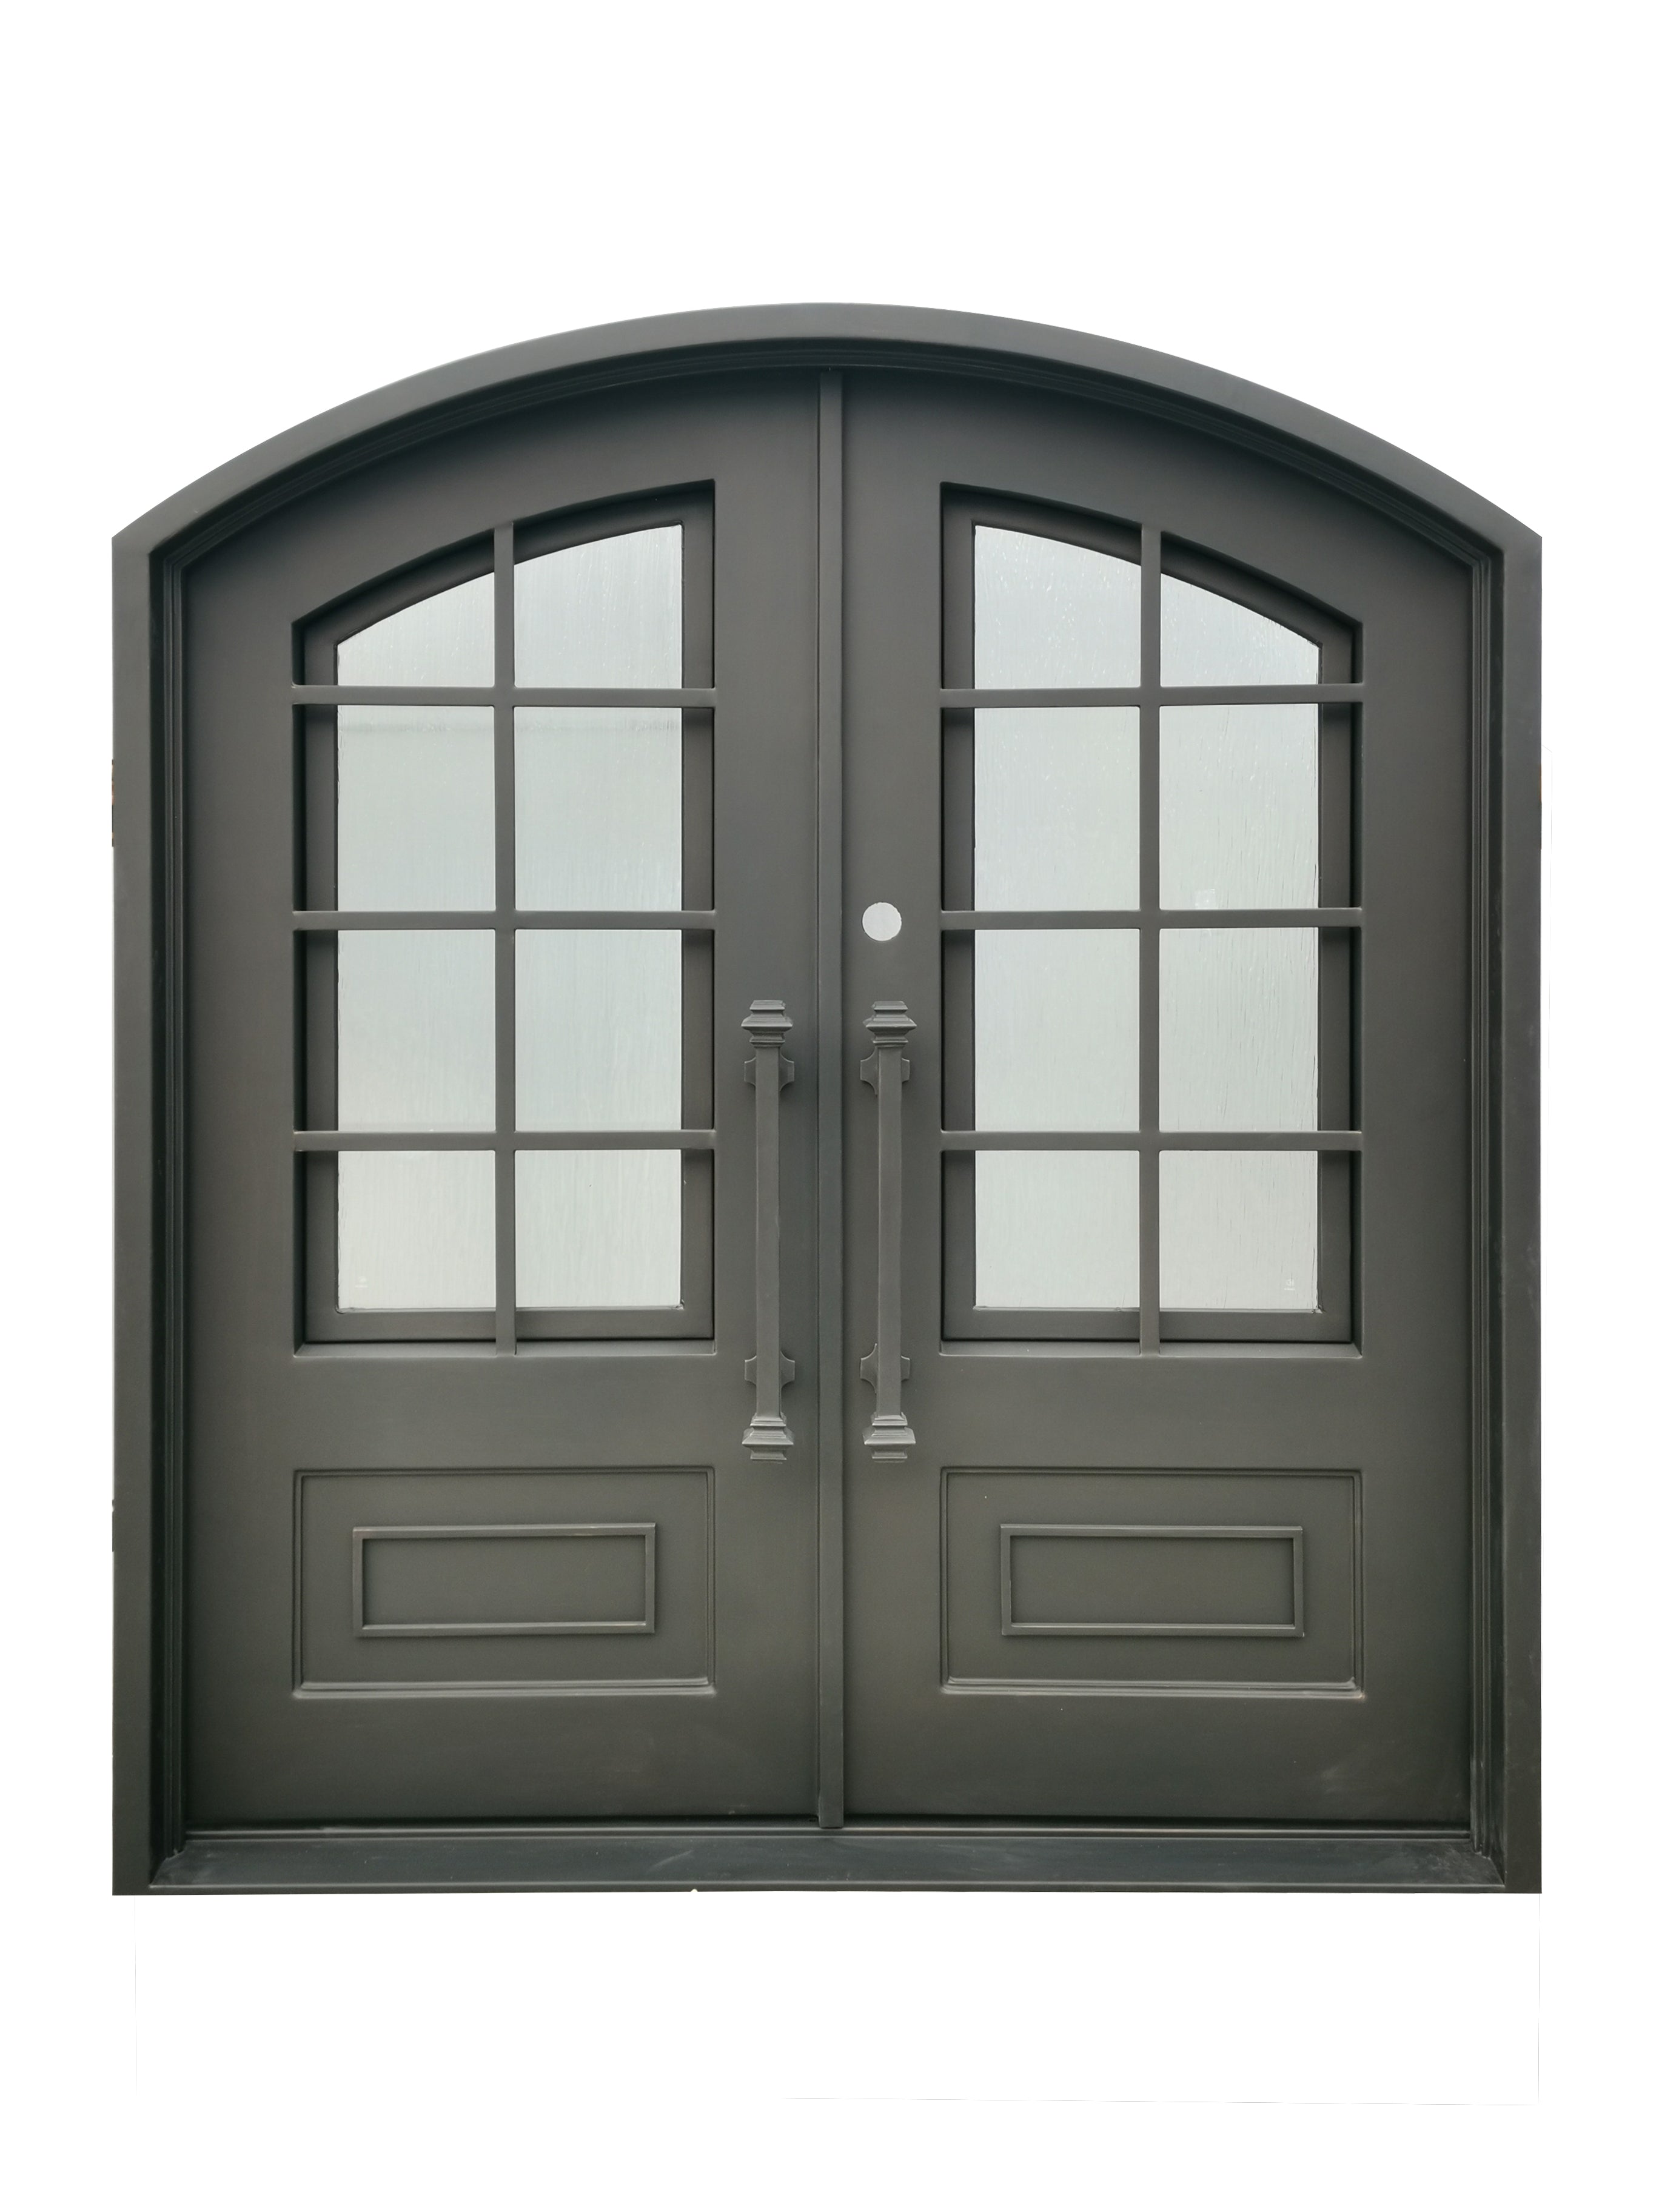 Anderson Model Double Front Entry Iron Door With Tempered Rain Glass Dark Bronze Finish - AAWAIZ IMPORTS